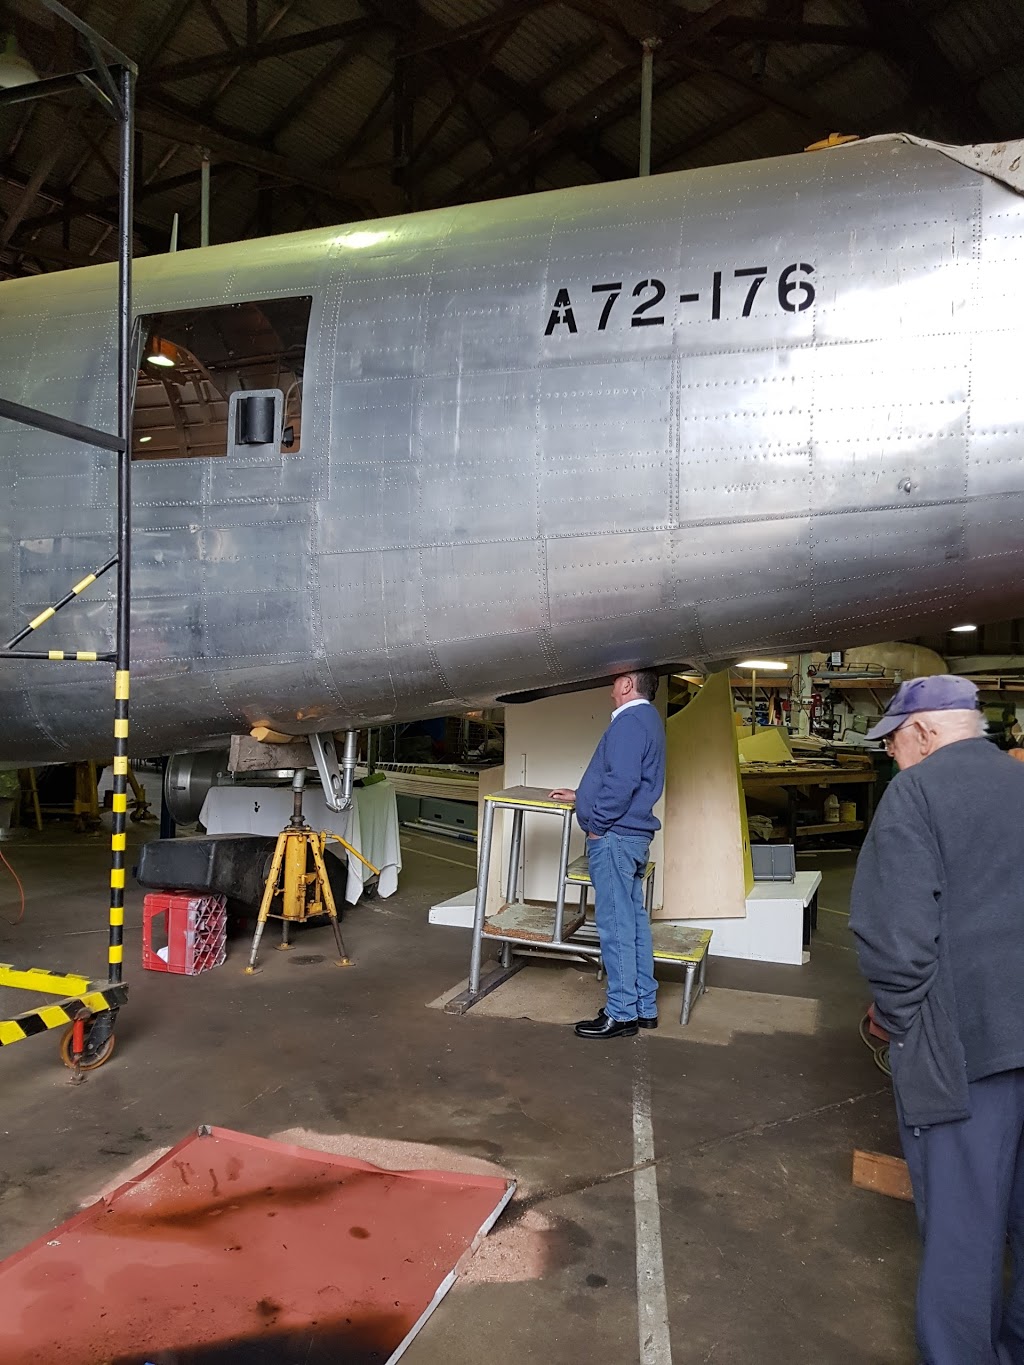 Liberator Restoration Project And Museum | Werribee South VIC 3030, Australia